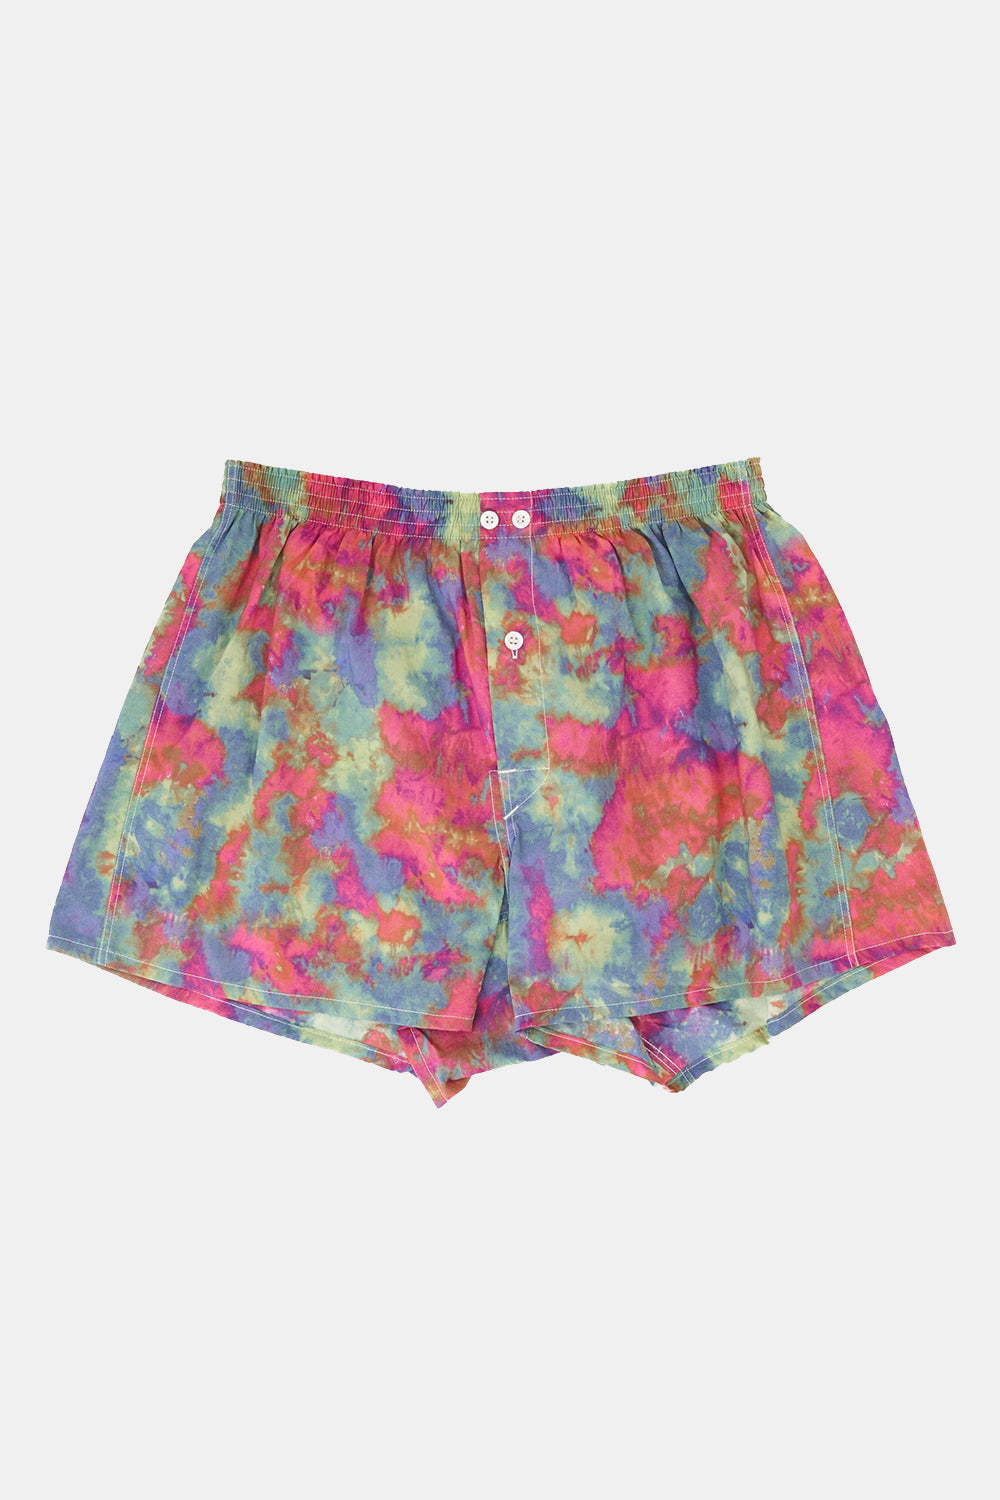 Anonymous Ism Psychedelic Print Boxers - Pink/Green | Number Six